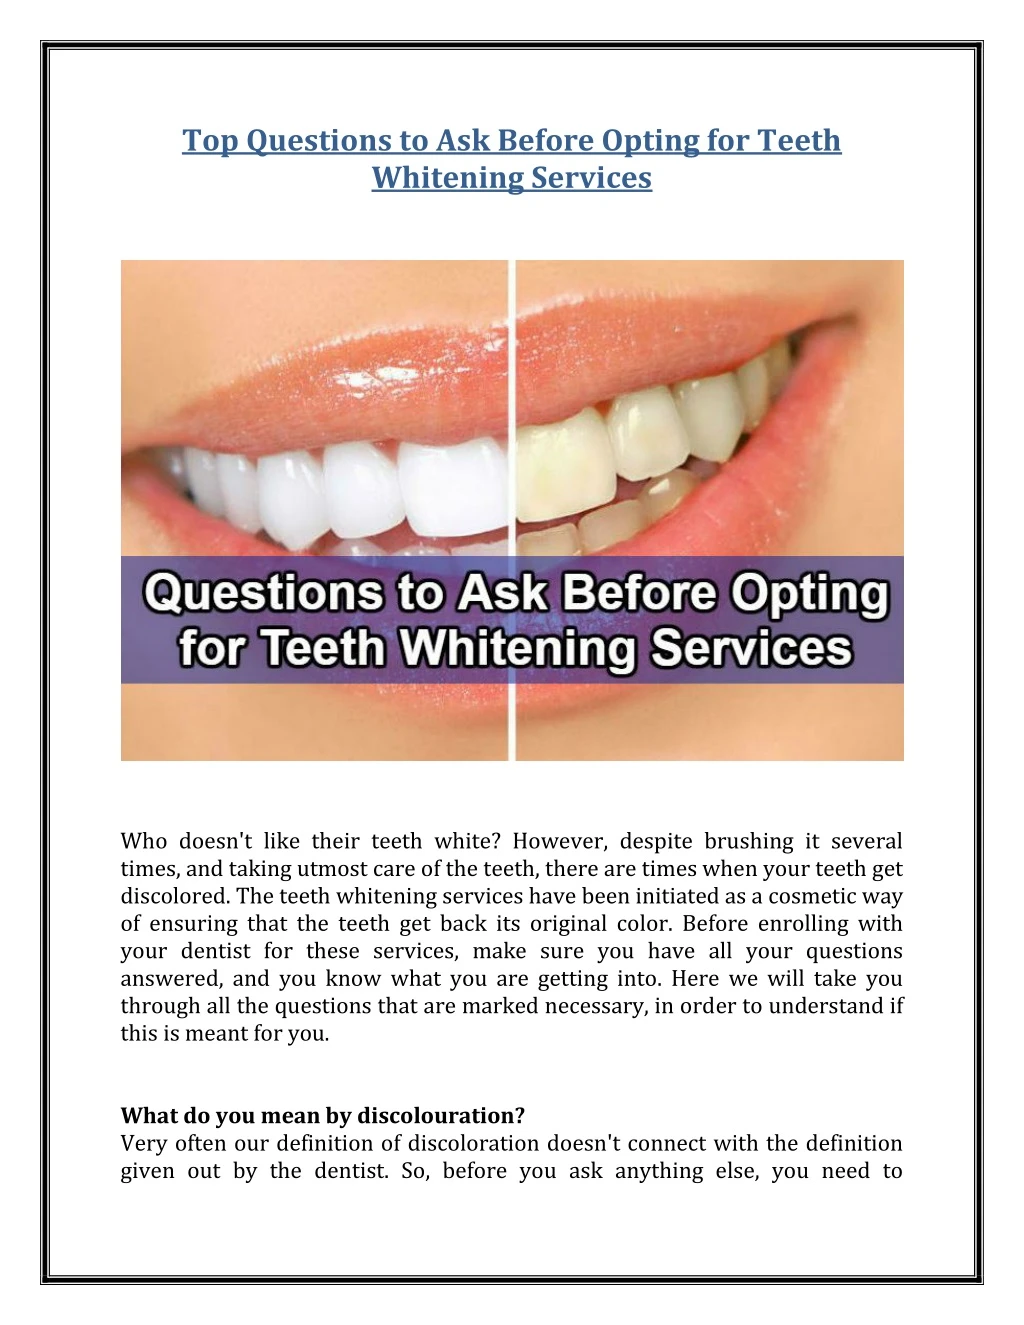 top questions to ask before opting for teeth